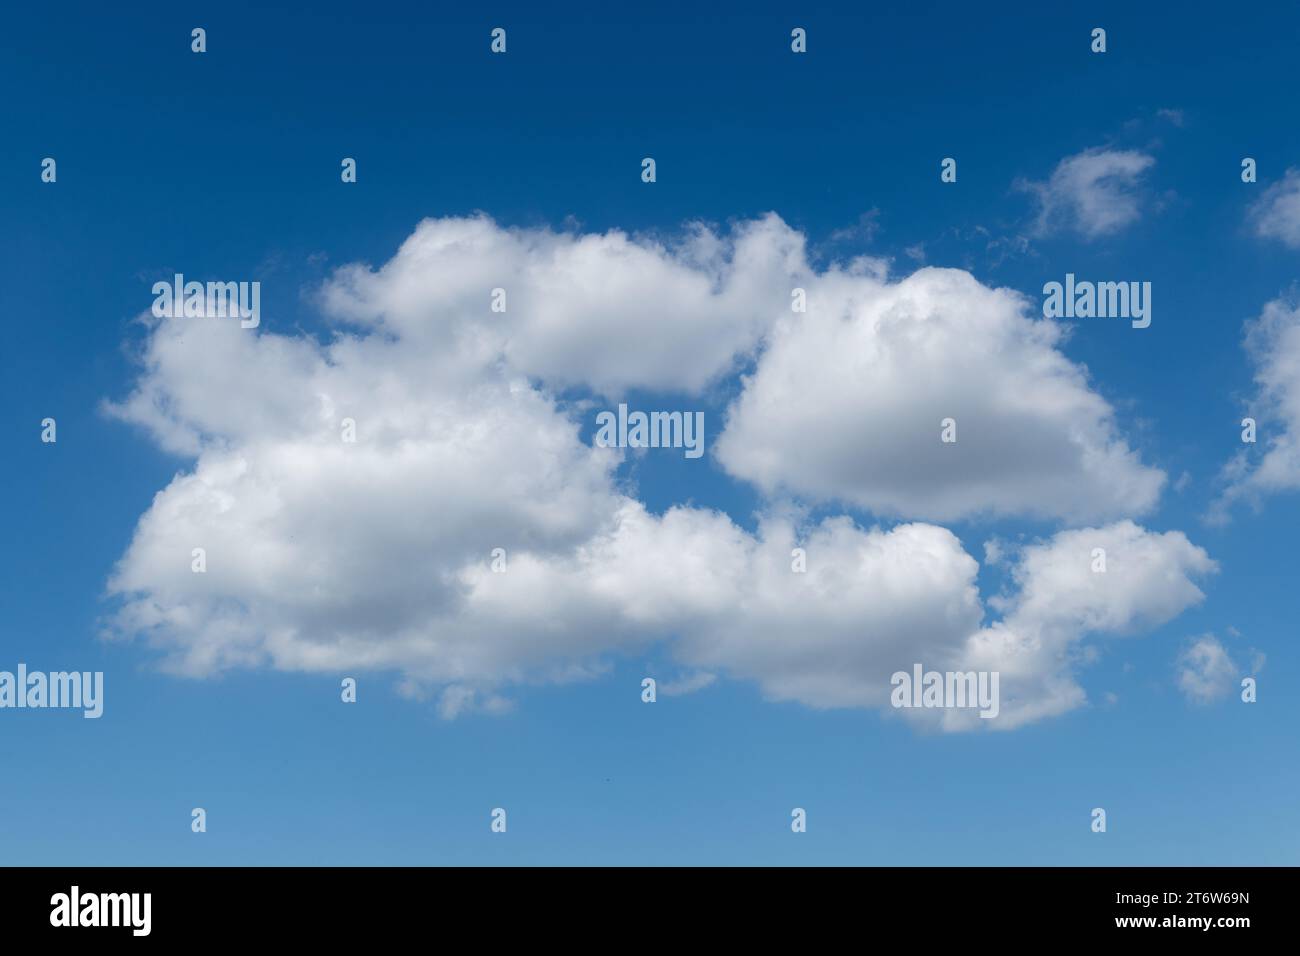 Detail of a white, puffy, cotton-like cumulus cloud formation set against a background of bright, blue sky during fair weather. Stock Photo